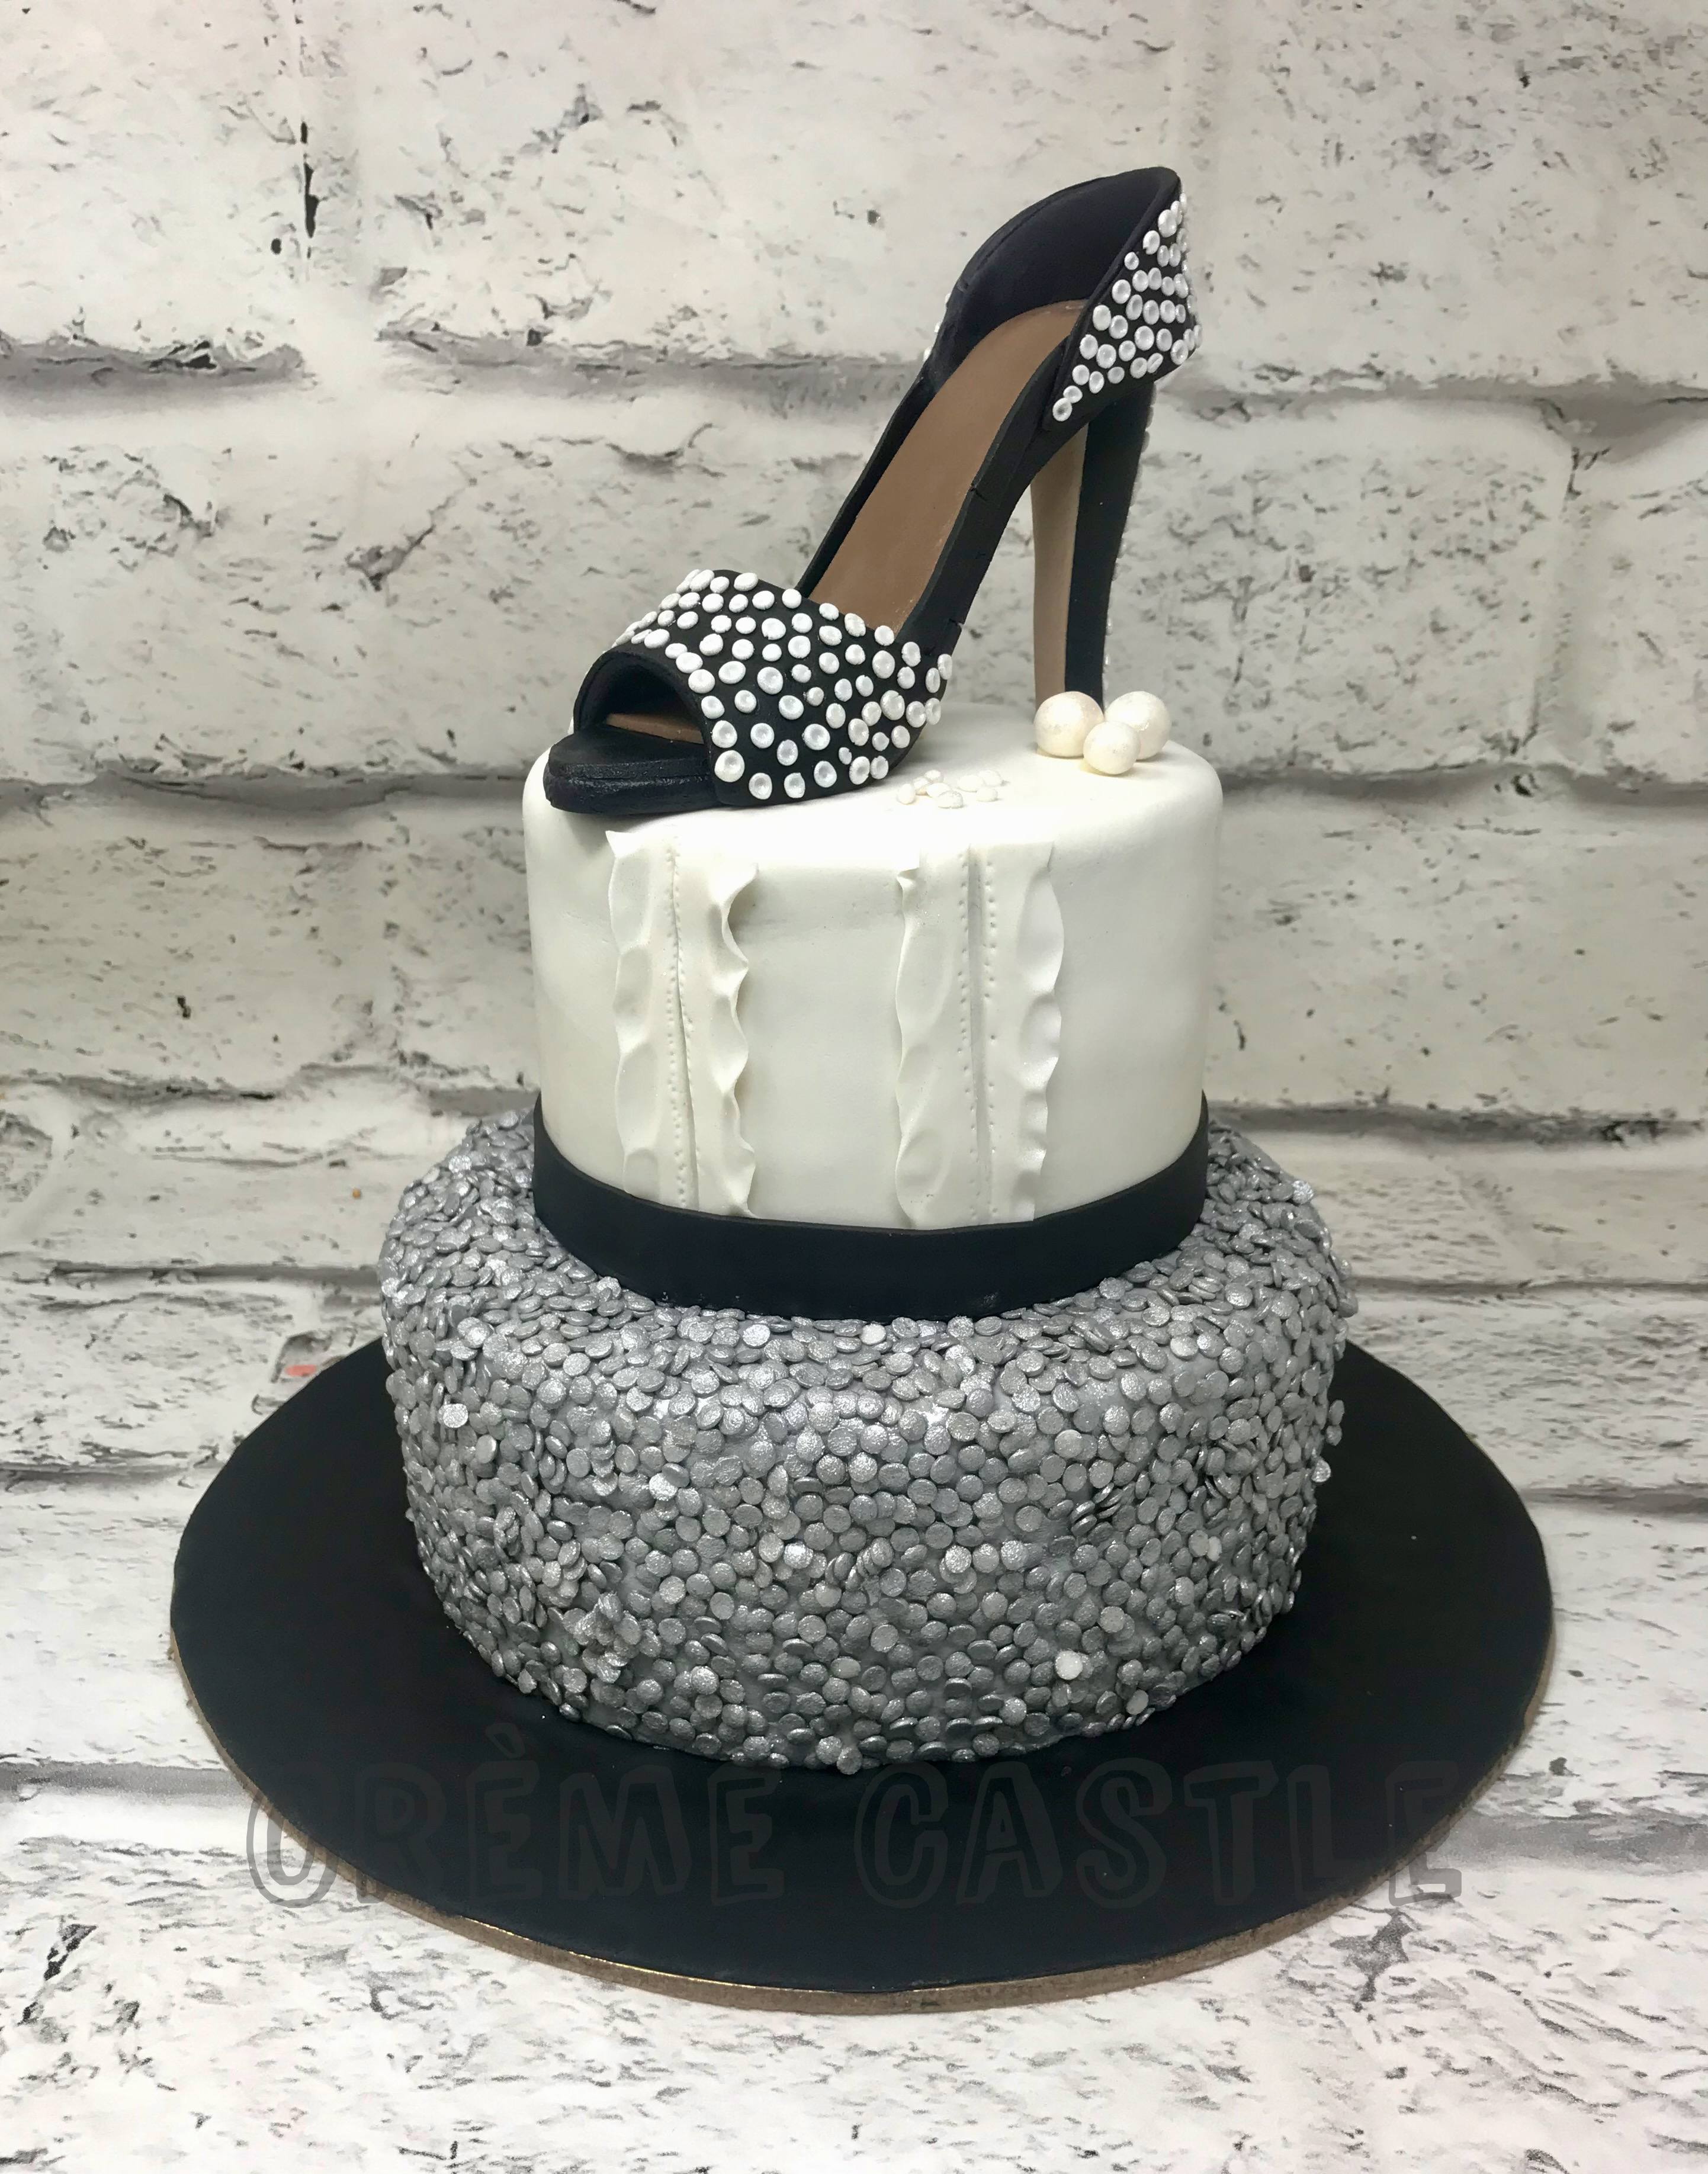 27+ Exclusive Picture of Happy Birthday Shoe Cake - birijus.com | 40th  birthday cakes, 50th birthday cake, Happy birthday shoes